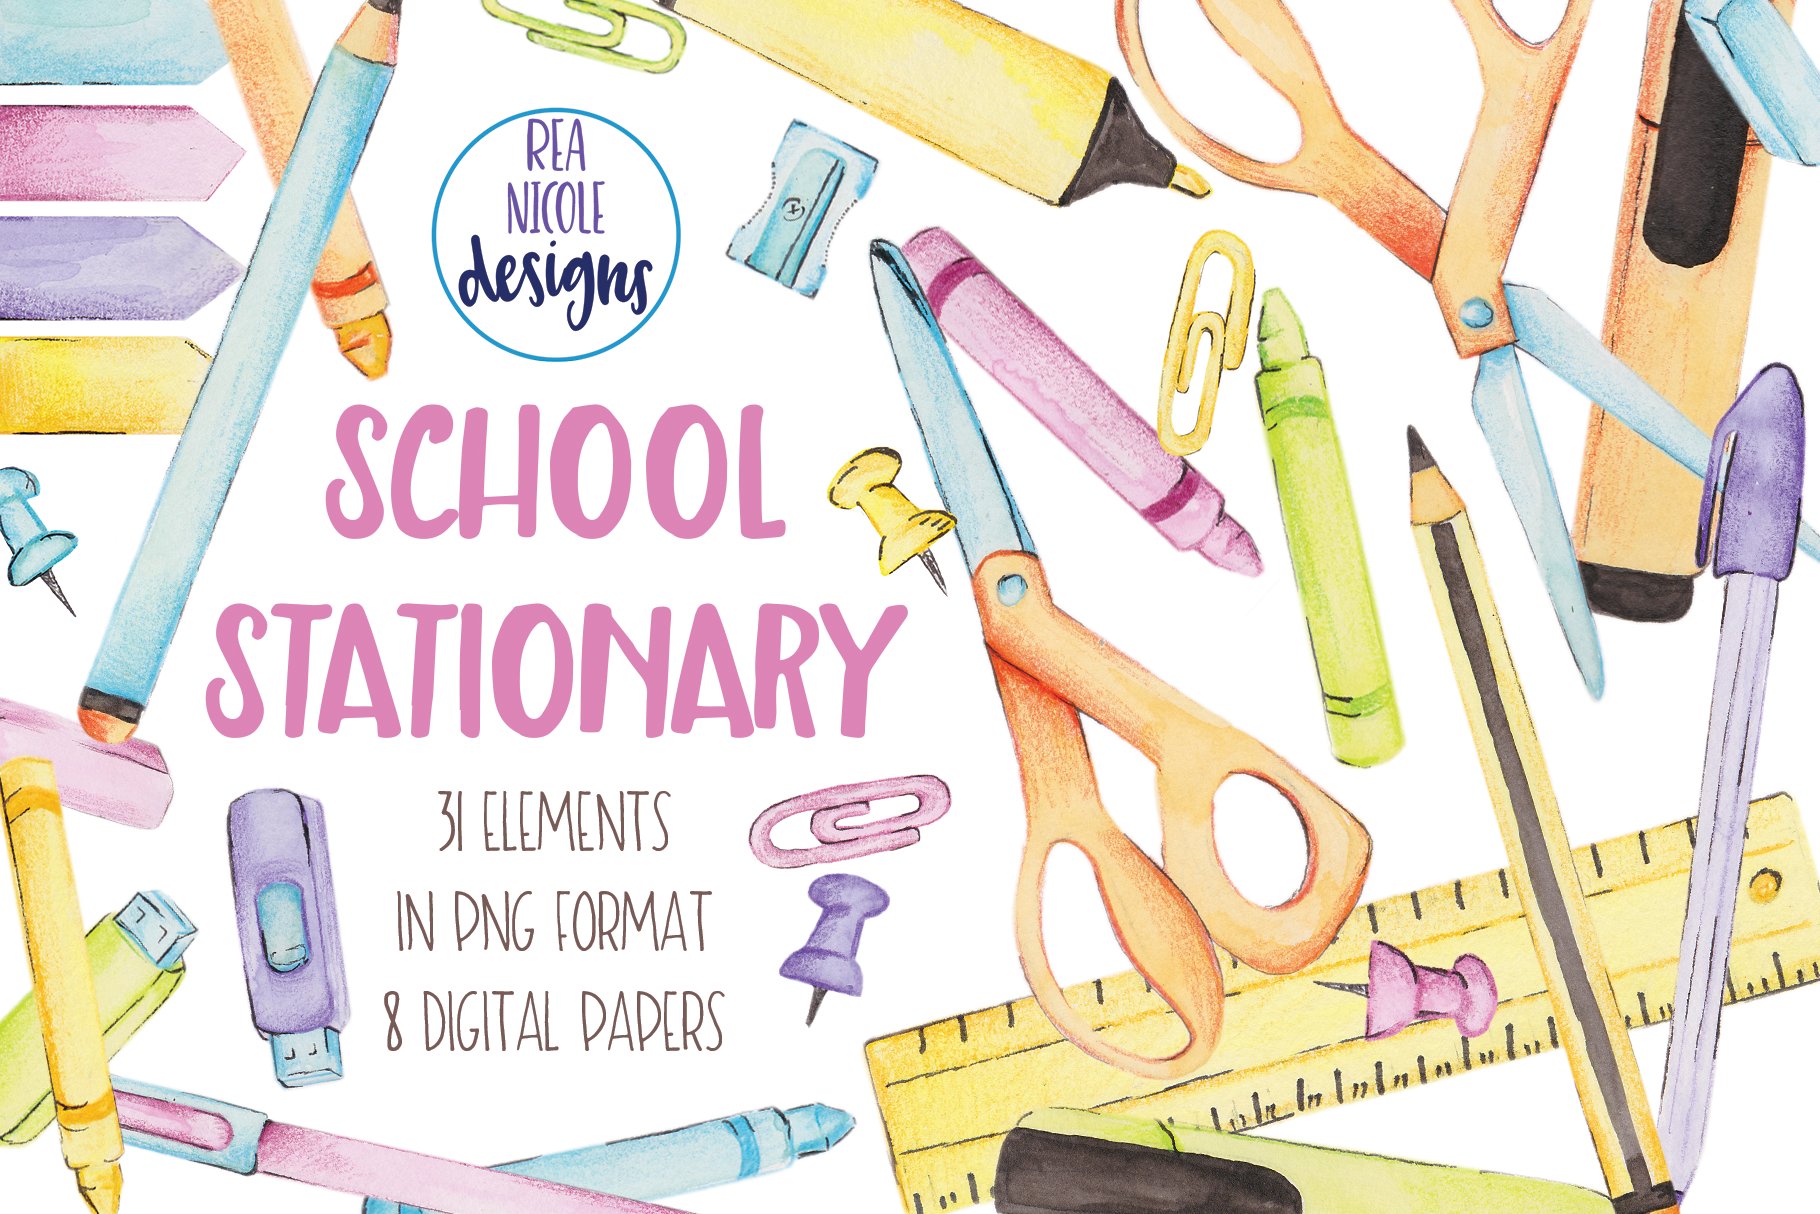 School Stationary Clip Art cover image.